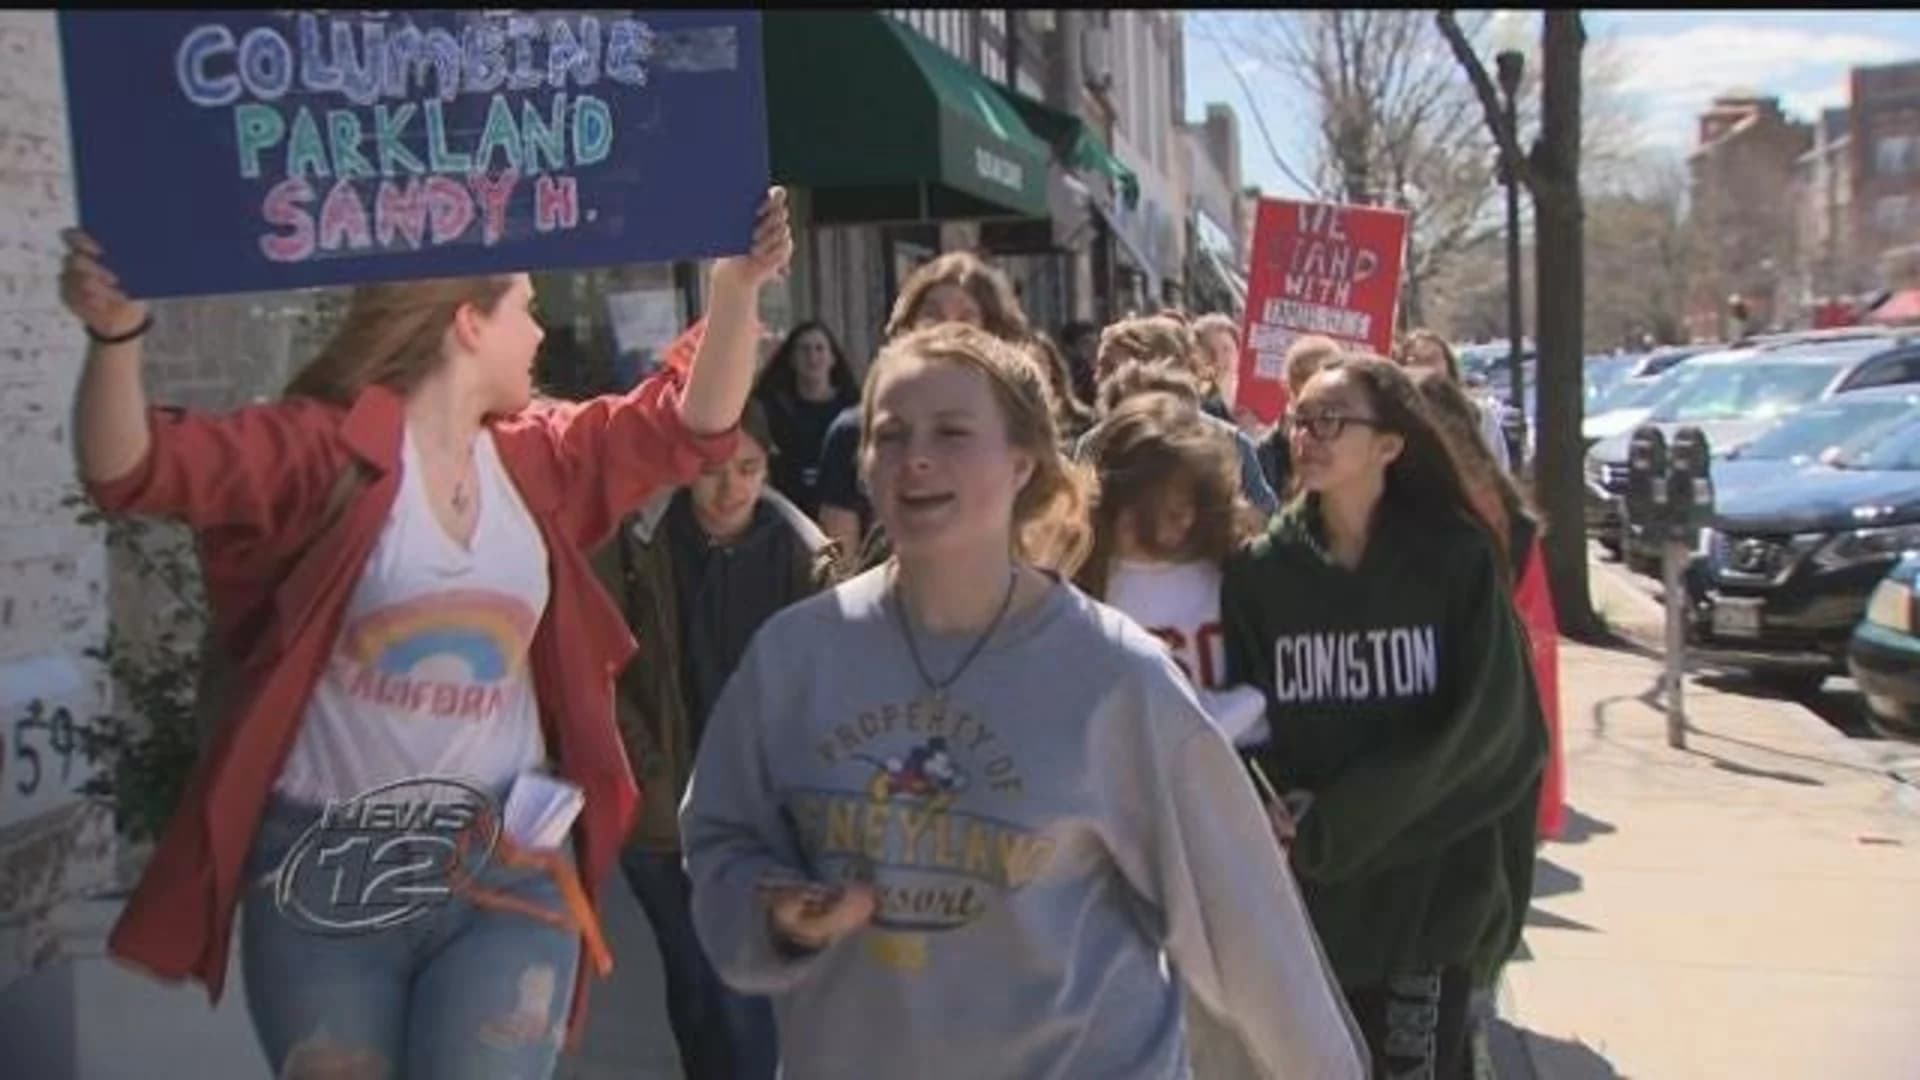 Students stage another walkout for stricter gun laws